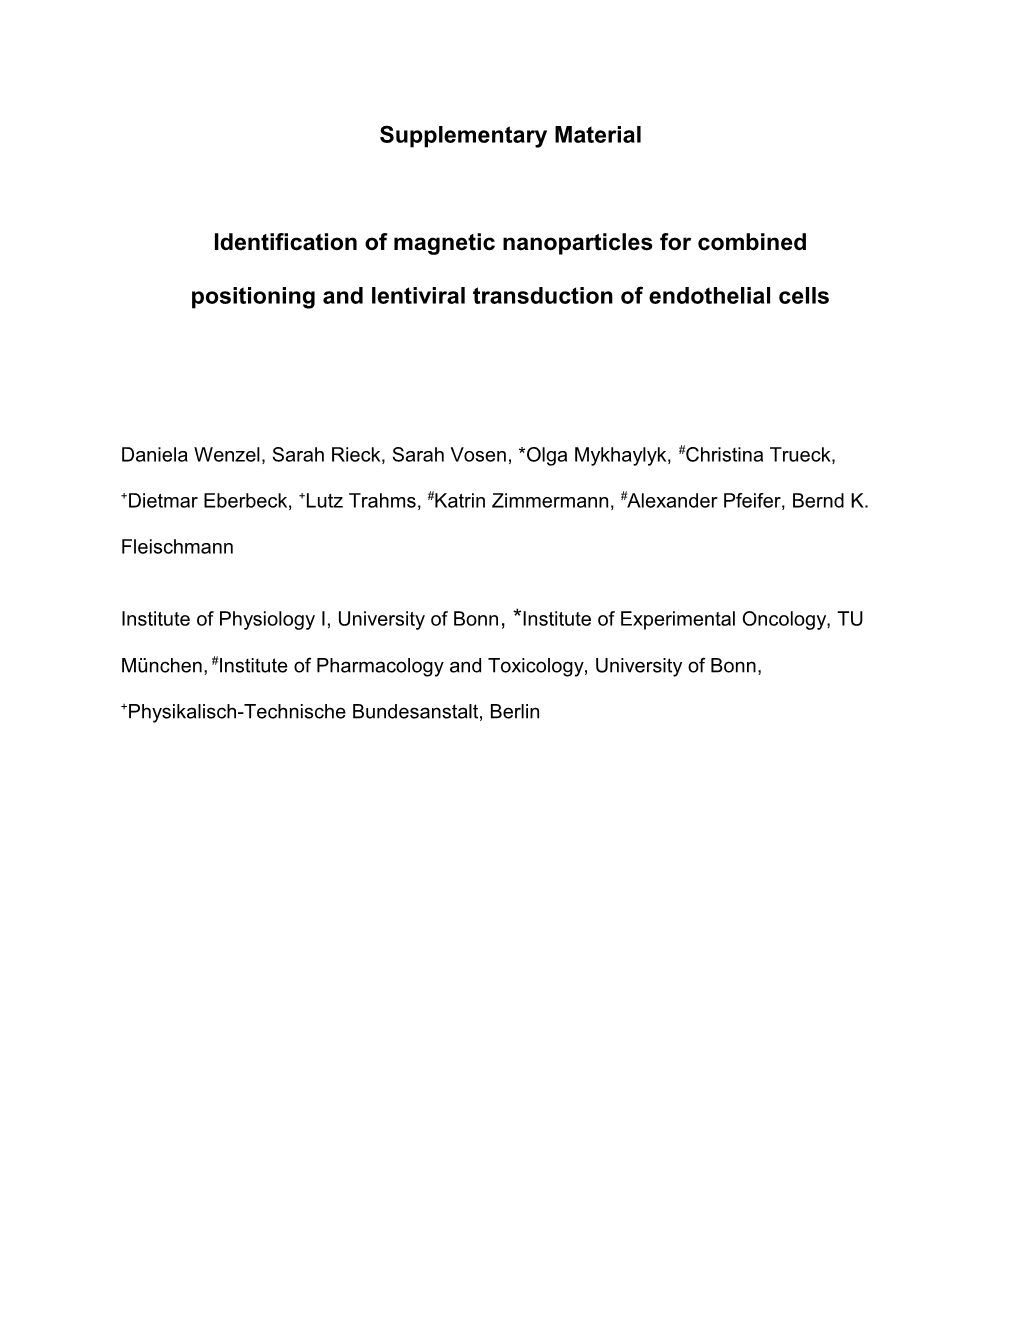 Identification of Magnetic Nanoparticles for Combined Positioning and Lentiviral Transduction